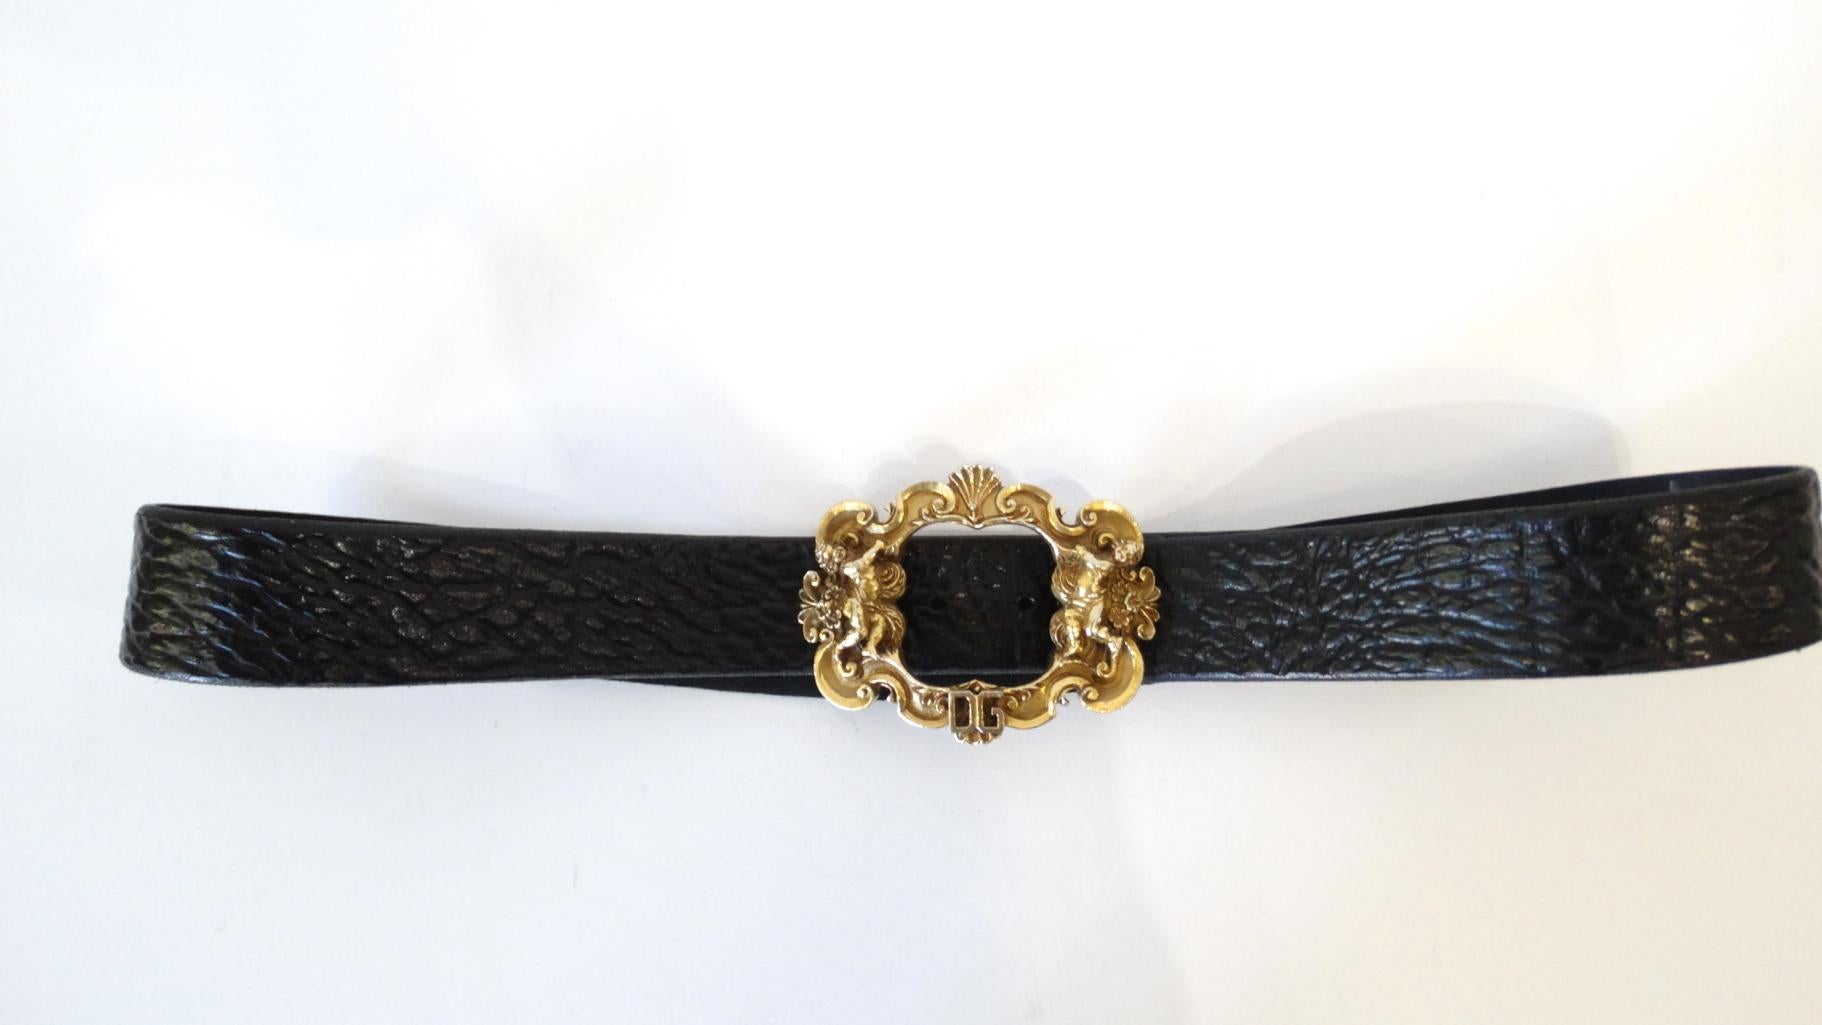 For the love of detail! This amazing Dolce & Gabbana belt is made of black textured leather. Features an amazing detailed Byzantine style statement buckle which is decorated with Cherub Angels and a DG at the bottom. Signed Dolce & Gabbana. Made in